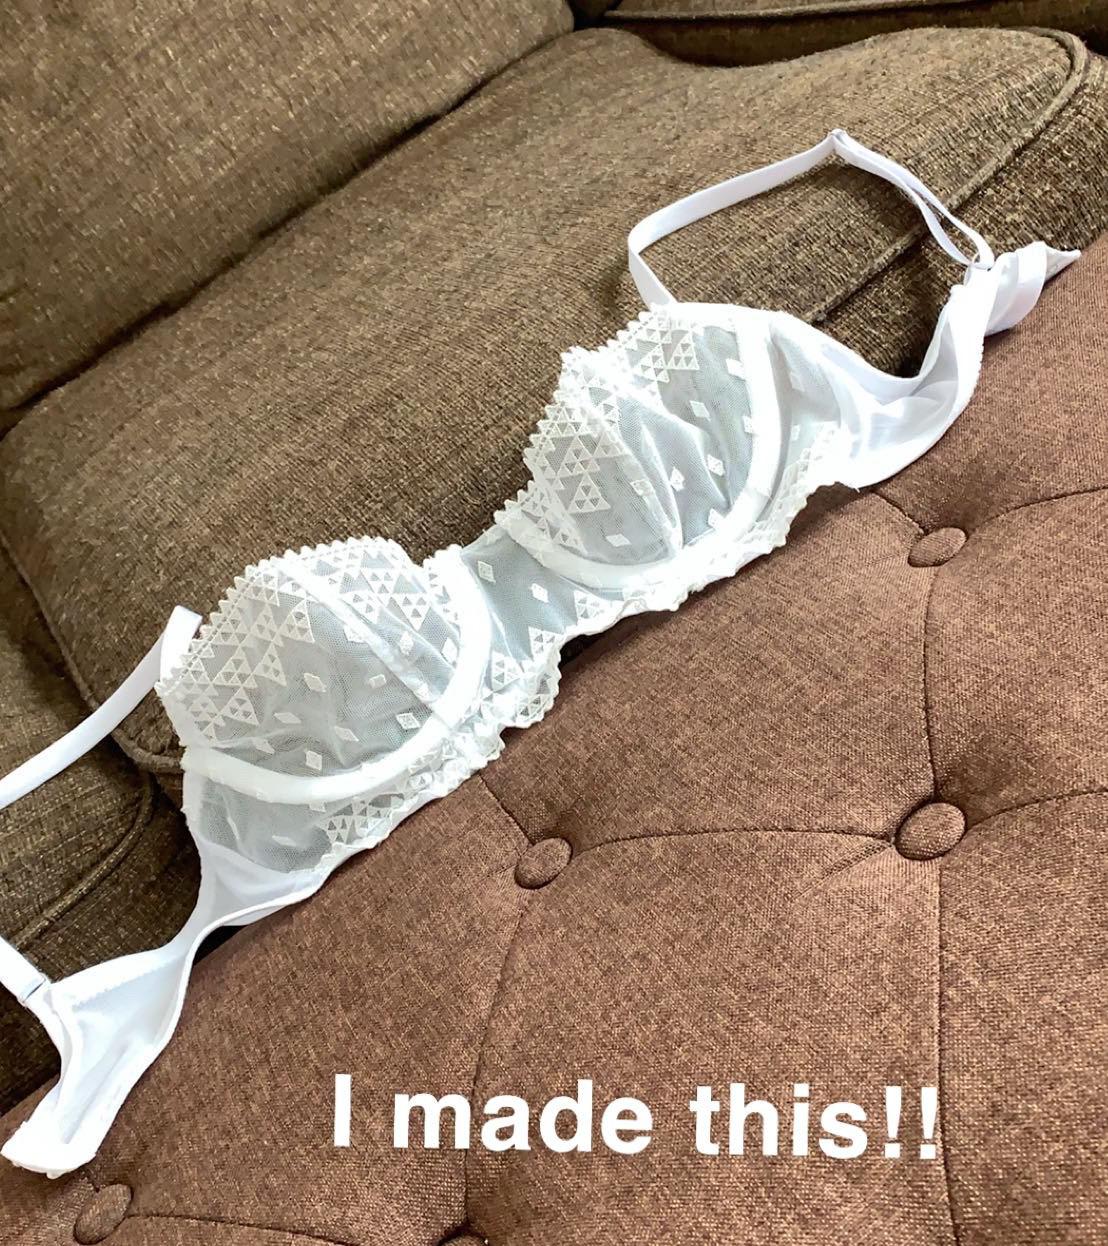 I was inspired by everyone making bras here, I've only made pajama pants before this!!